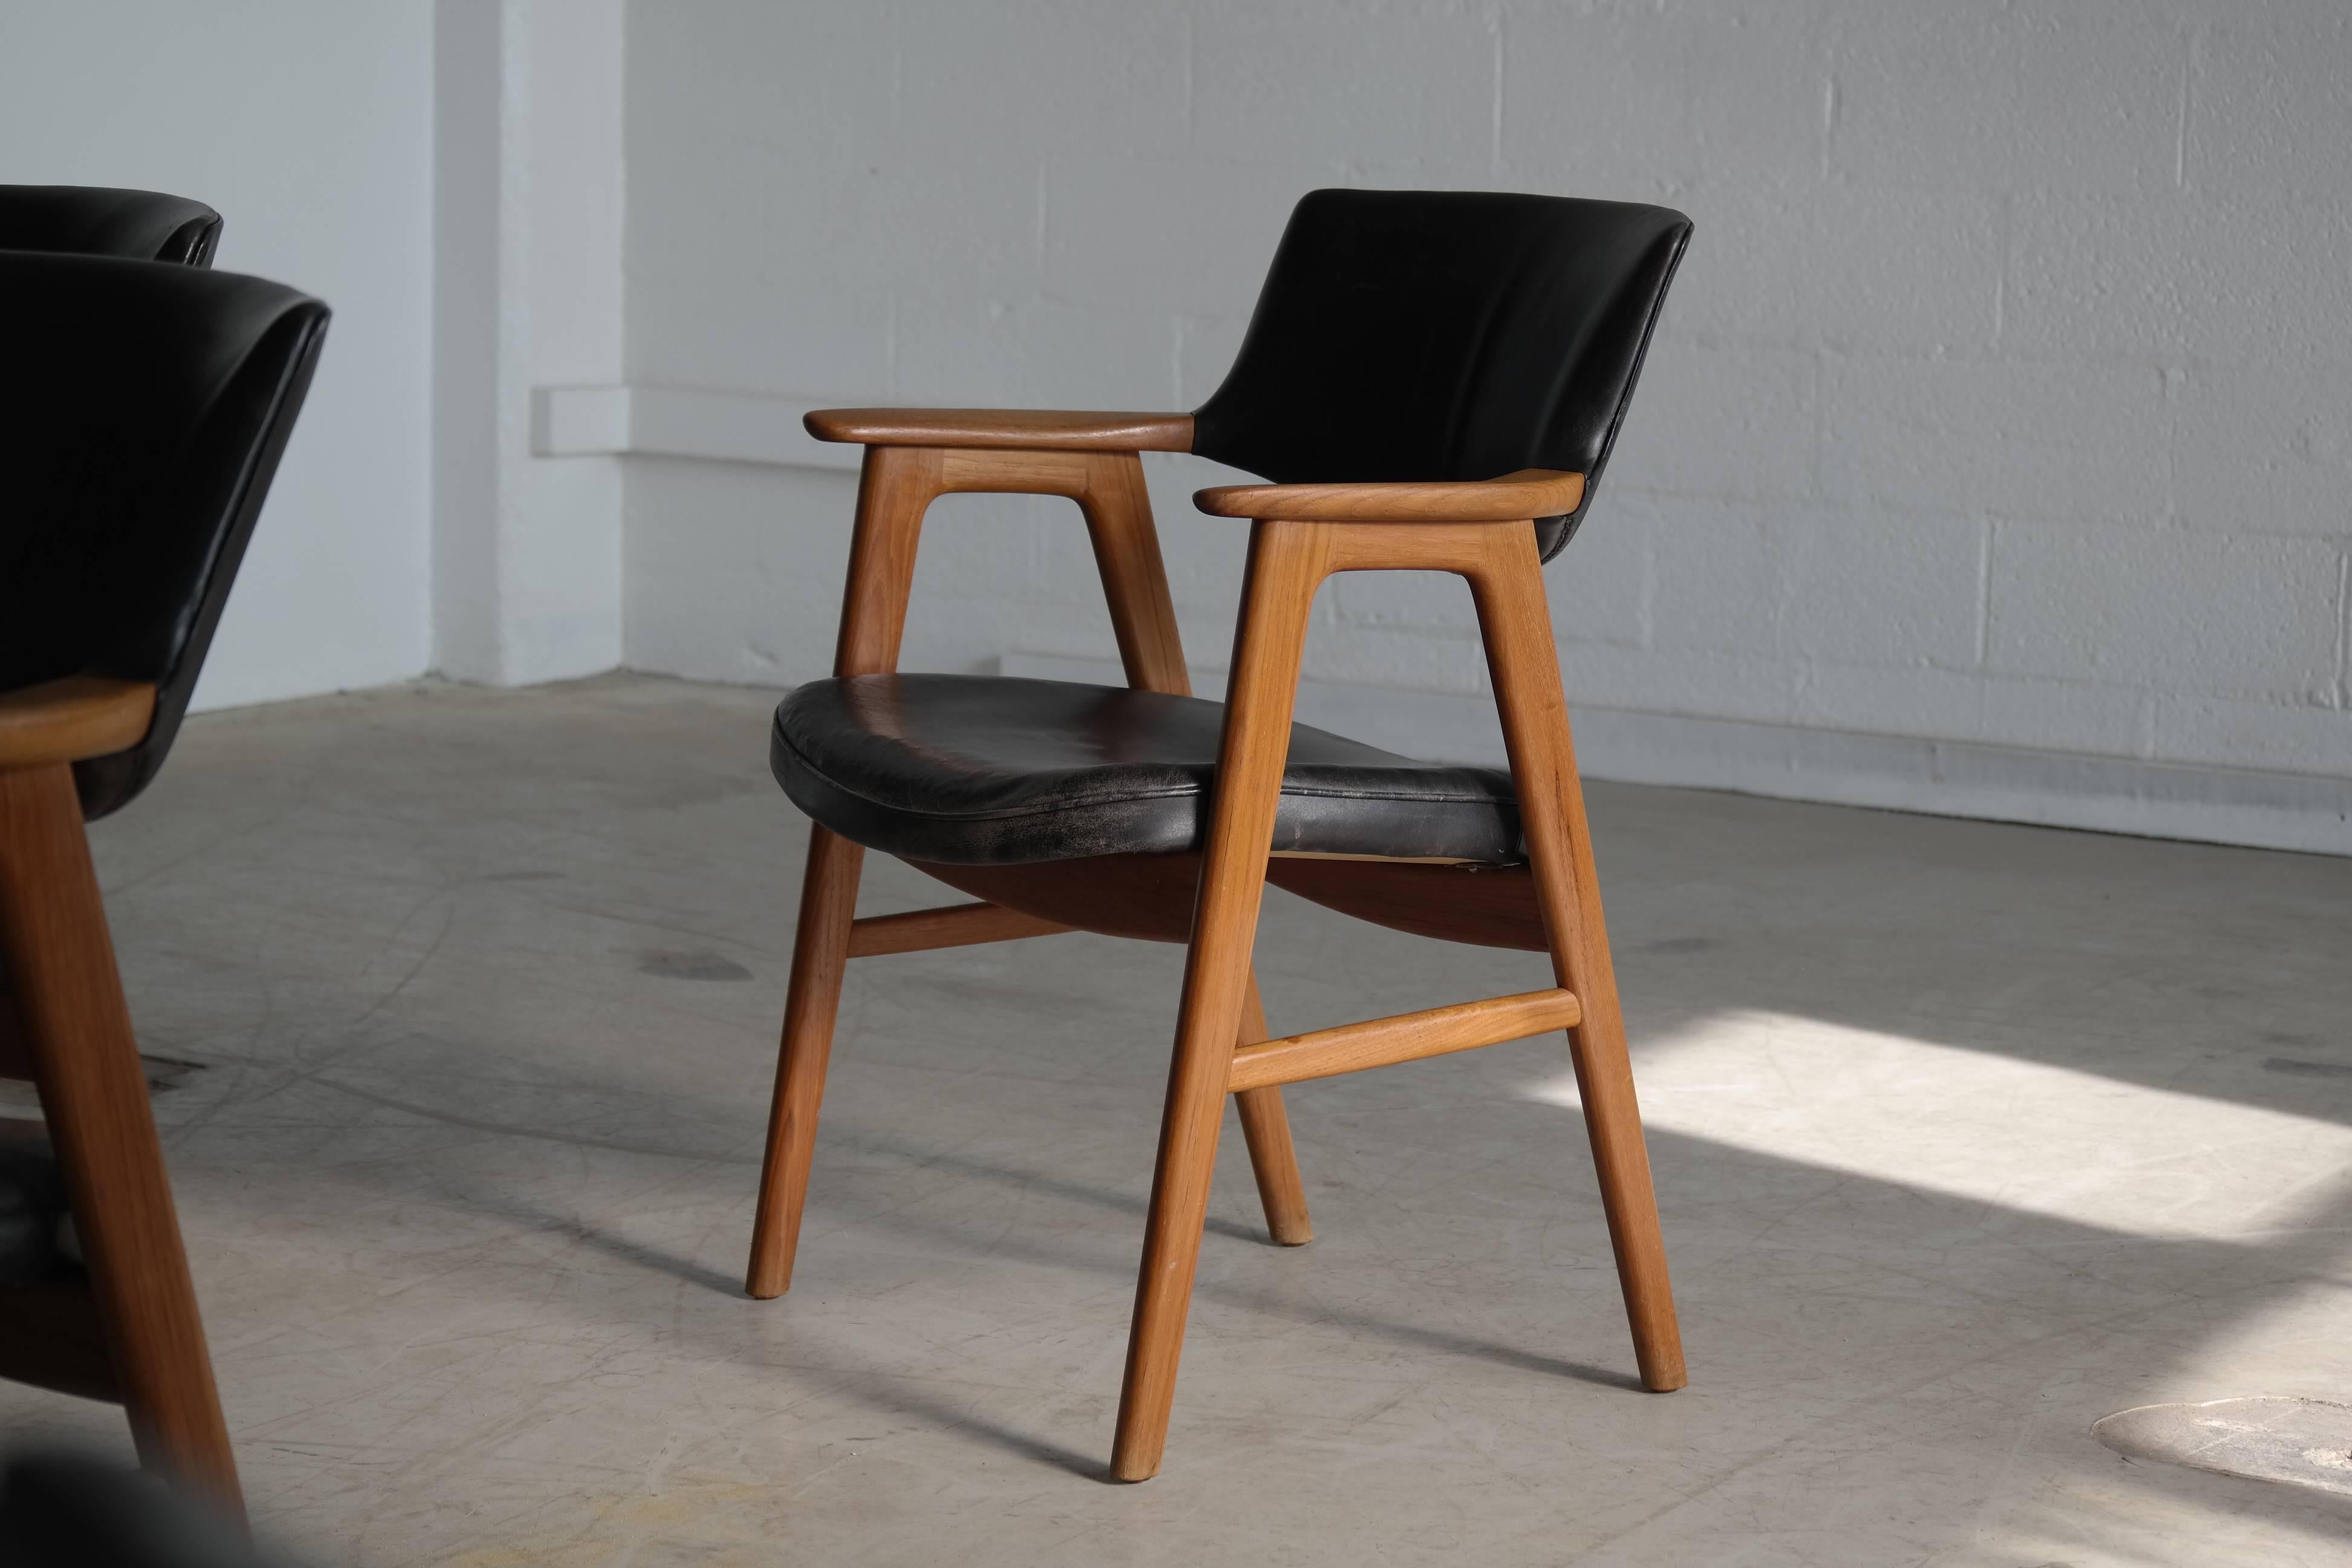  Erik Kirkegaard for Høng Set of 4 Dining Chairs in Teak and Leather   1